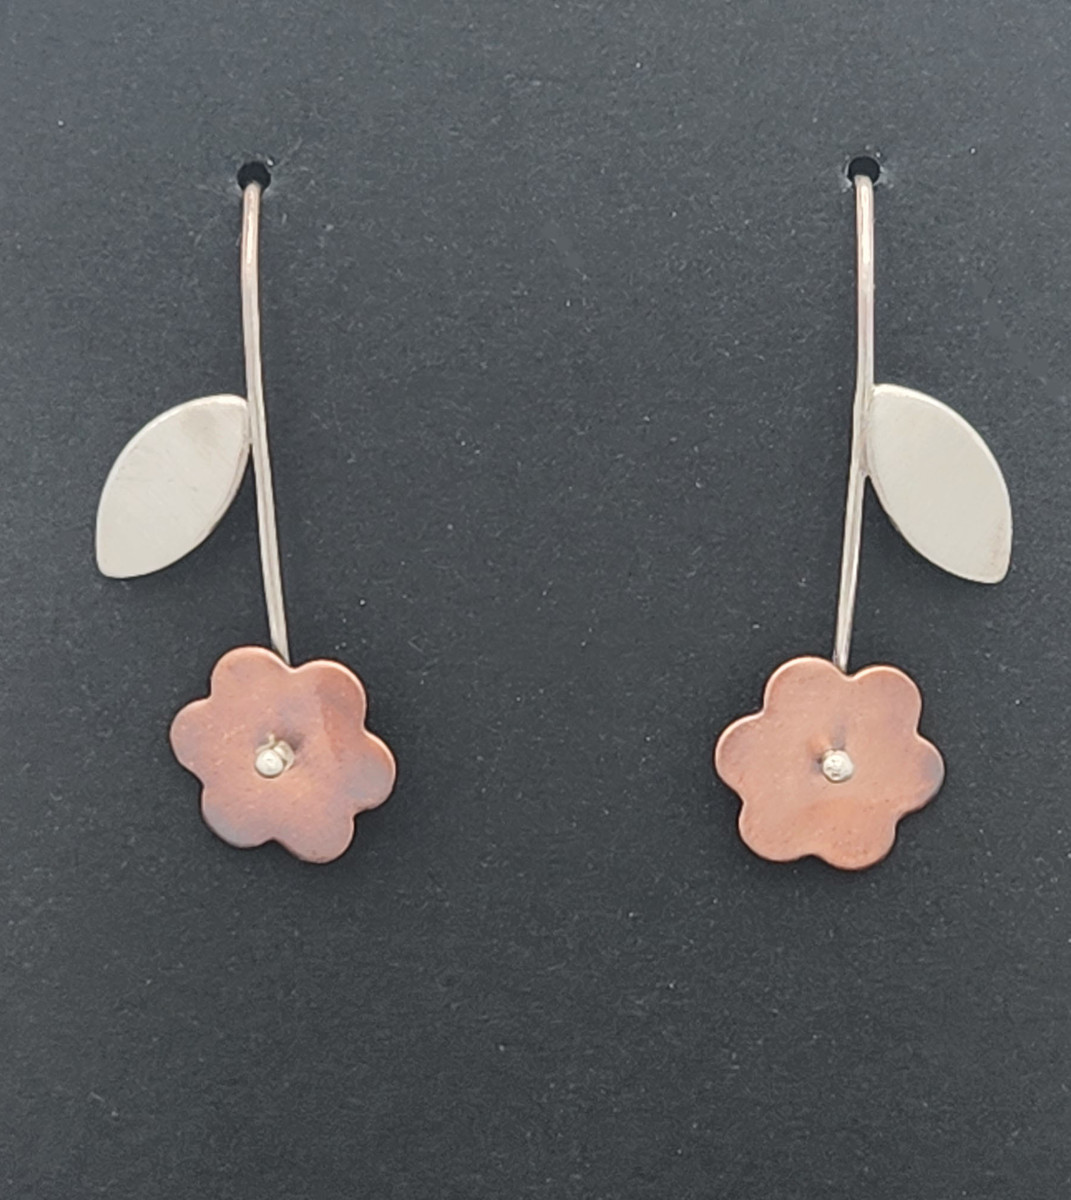 Earrings ~ Copper Drop Stems with Silver Leaves